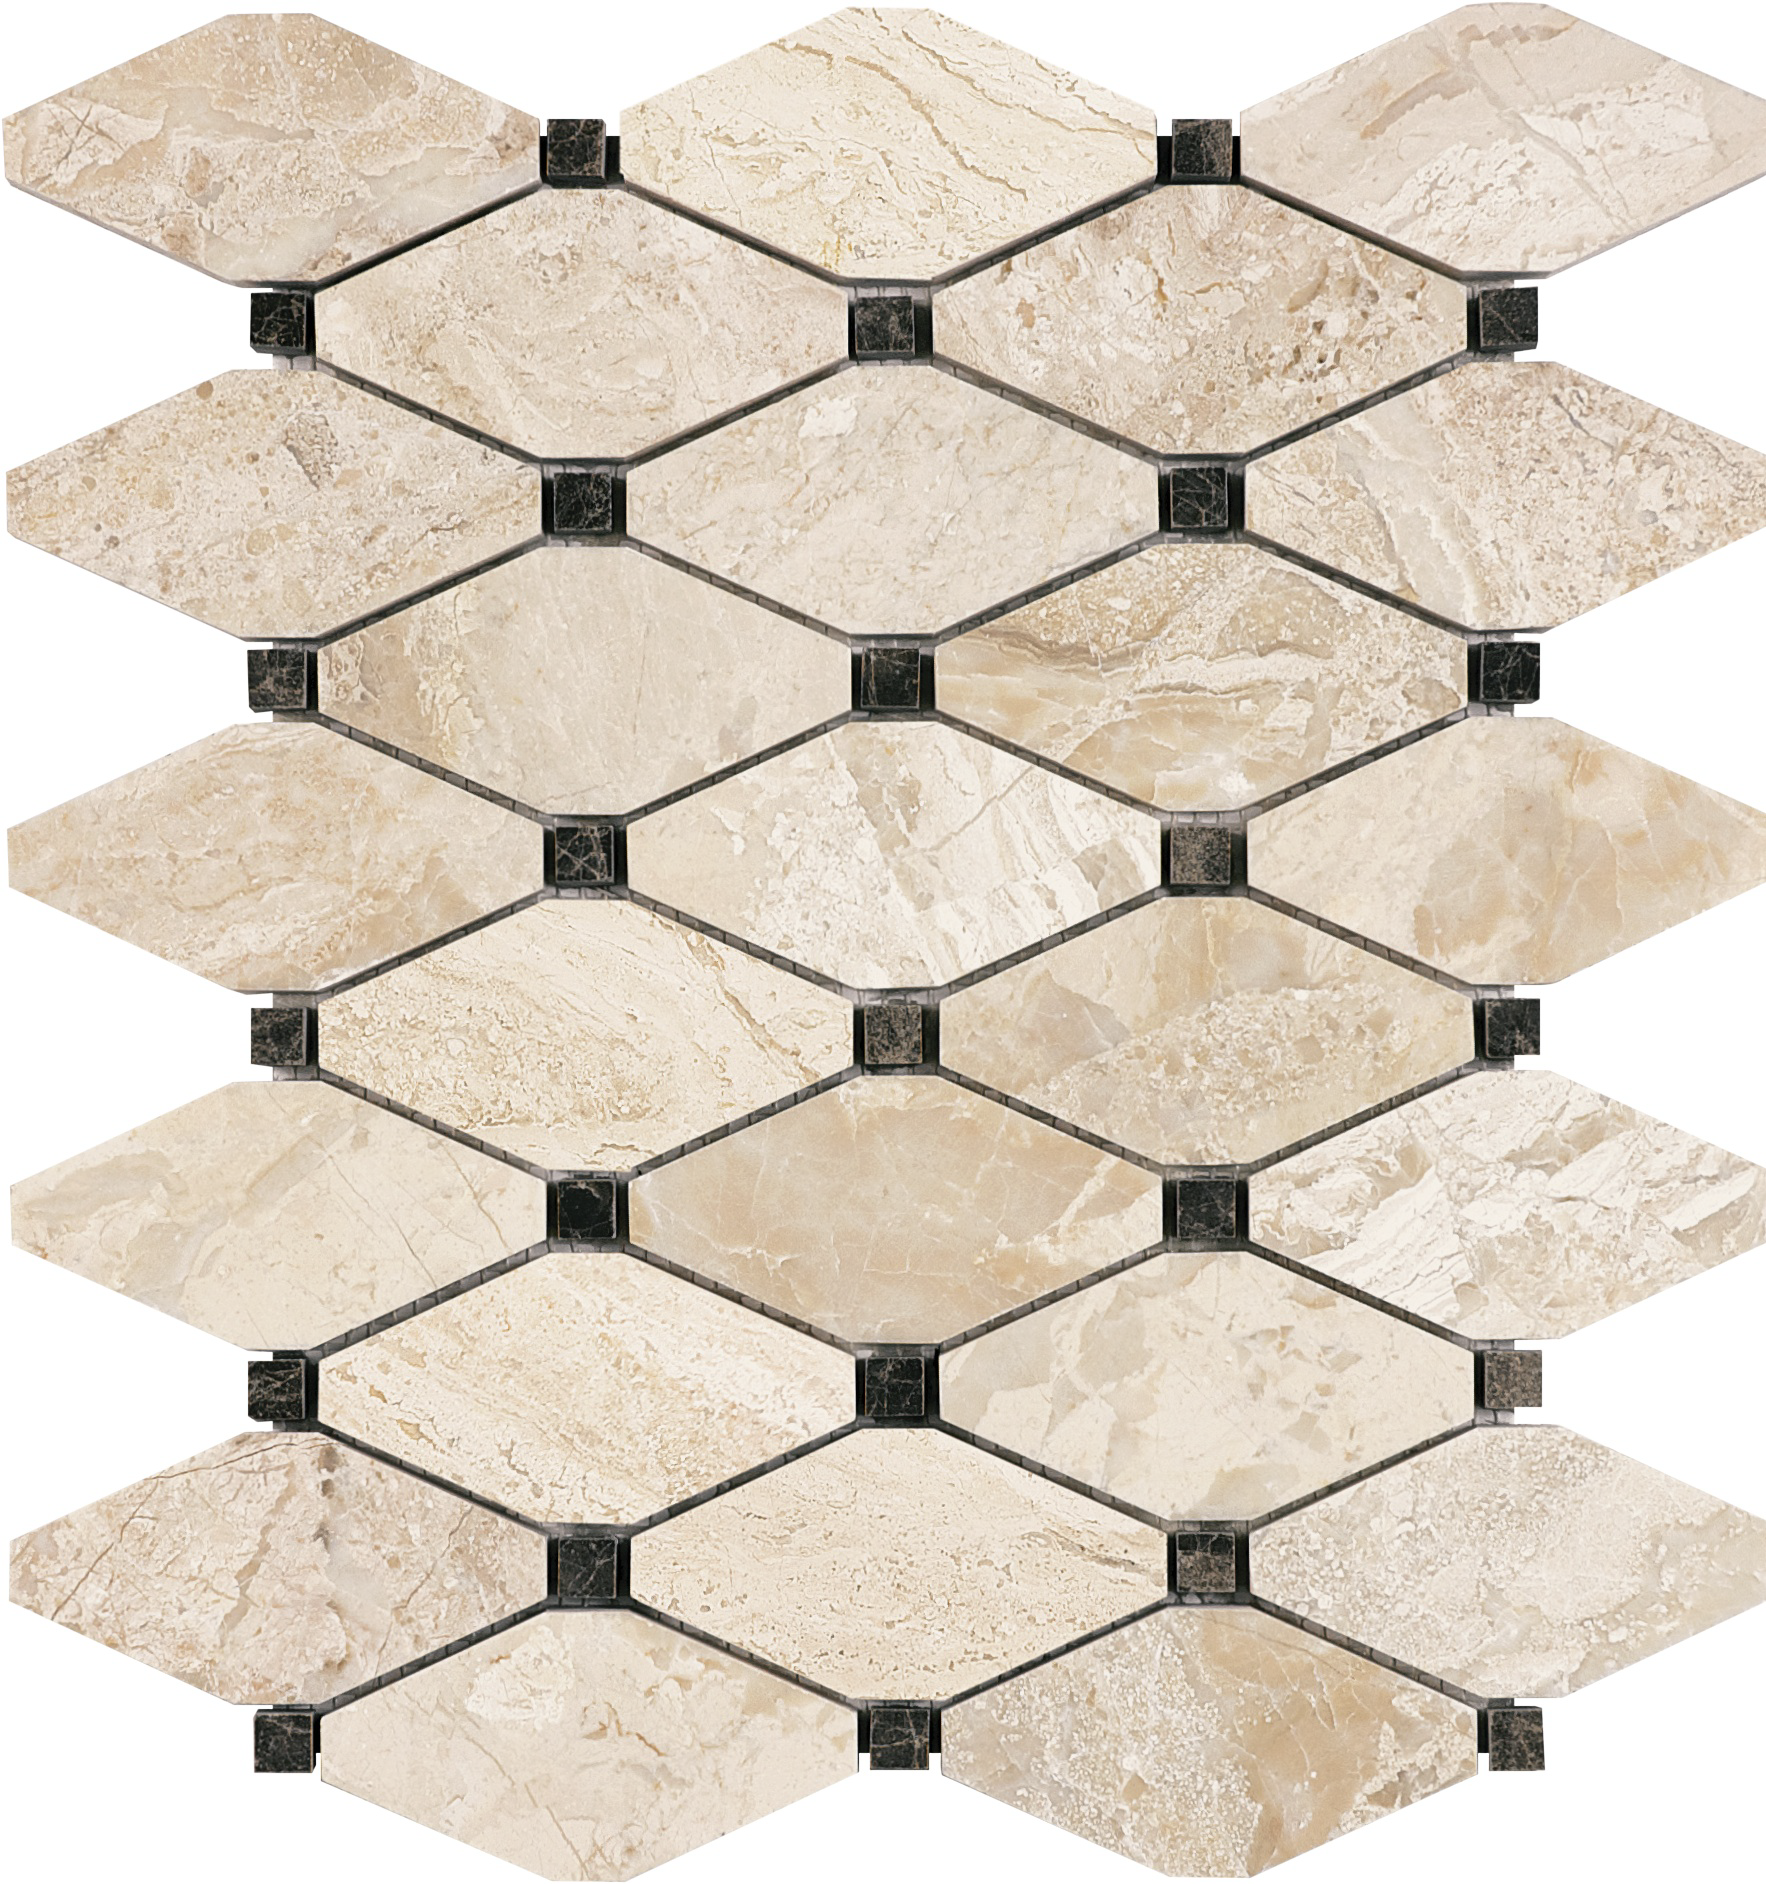 marble clipped diamond pattern natural stone mosaic from impero reale anatolia collection distributed by surface group international polished finish straight edge edge mesh shape